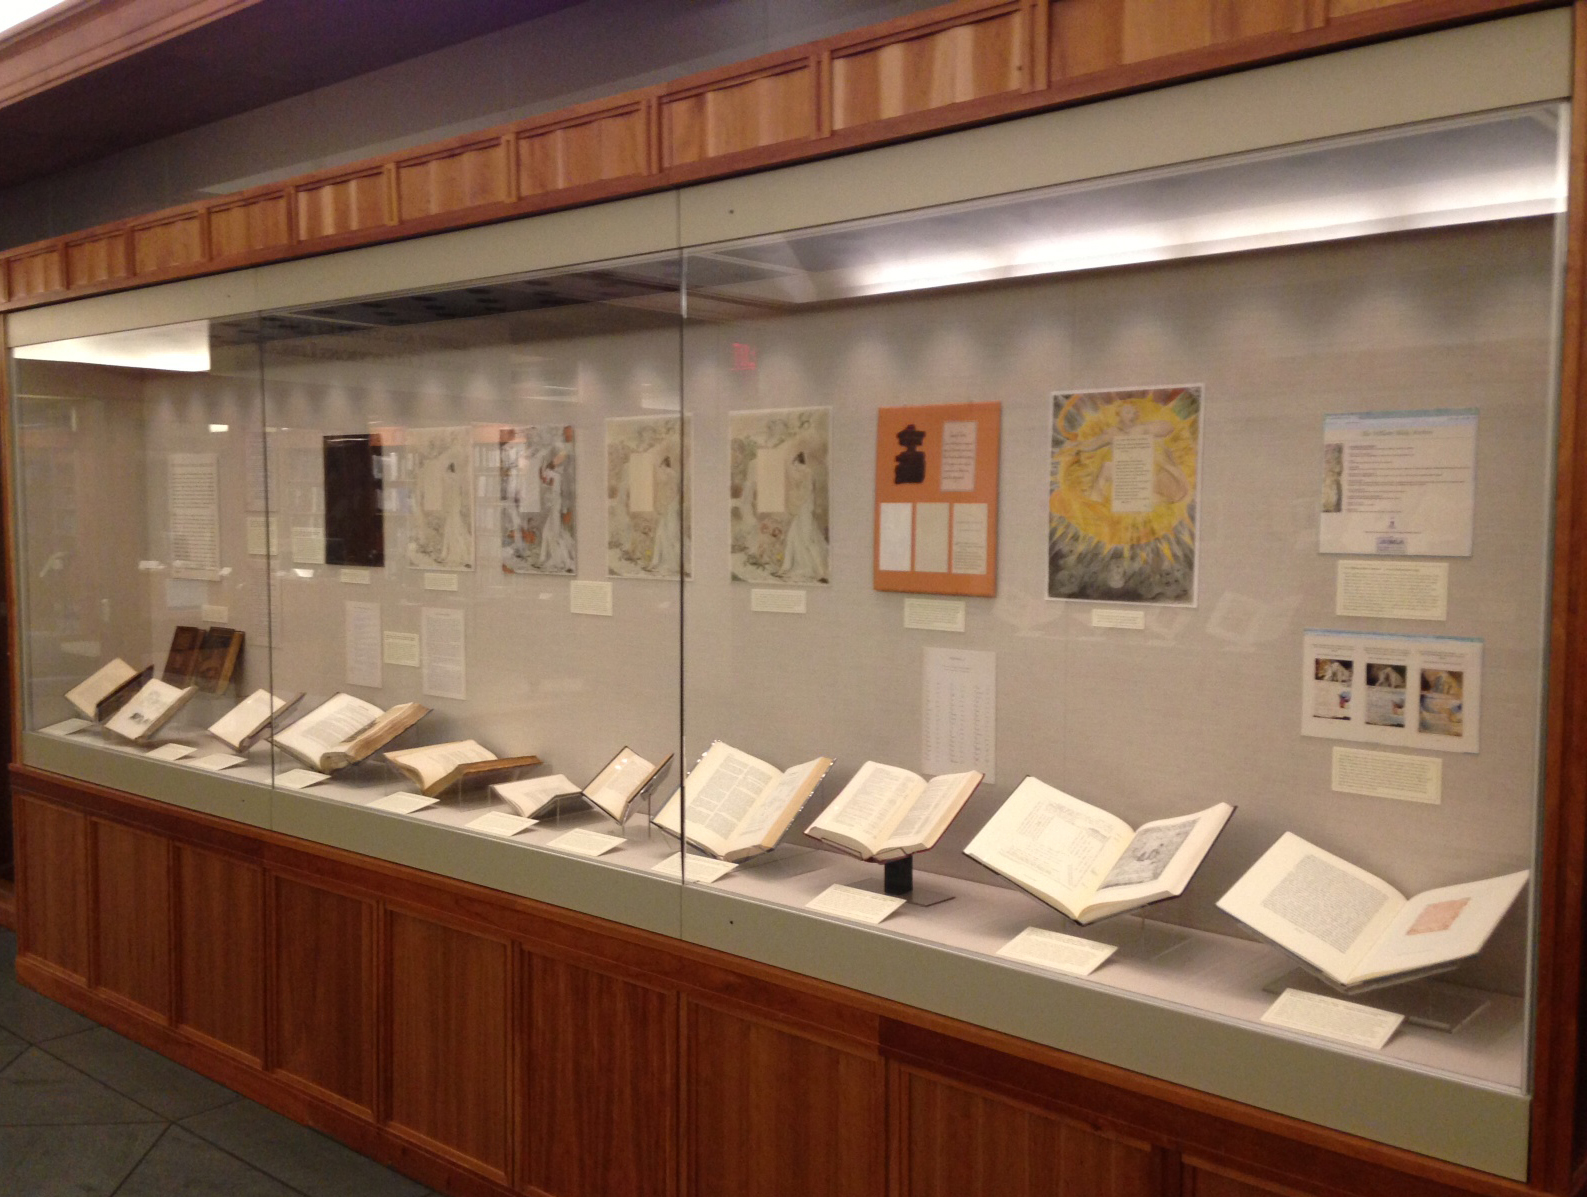 Part II of the exhibition: "Envisioning William Blake."